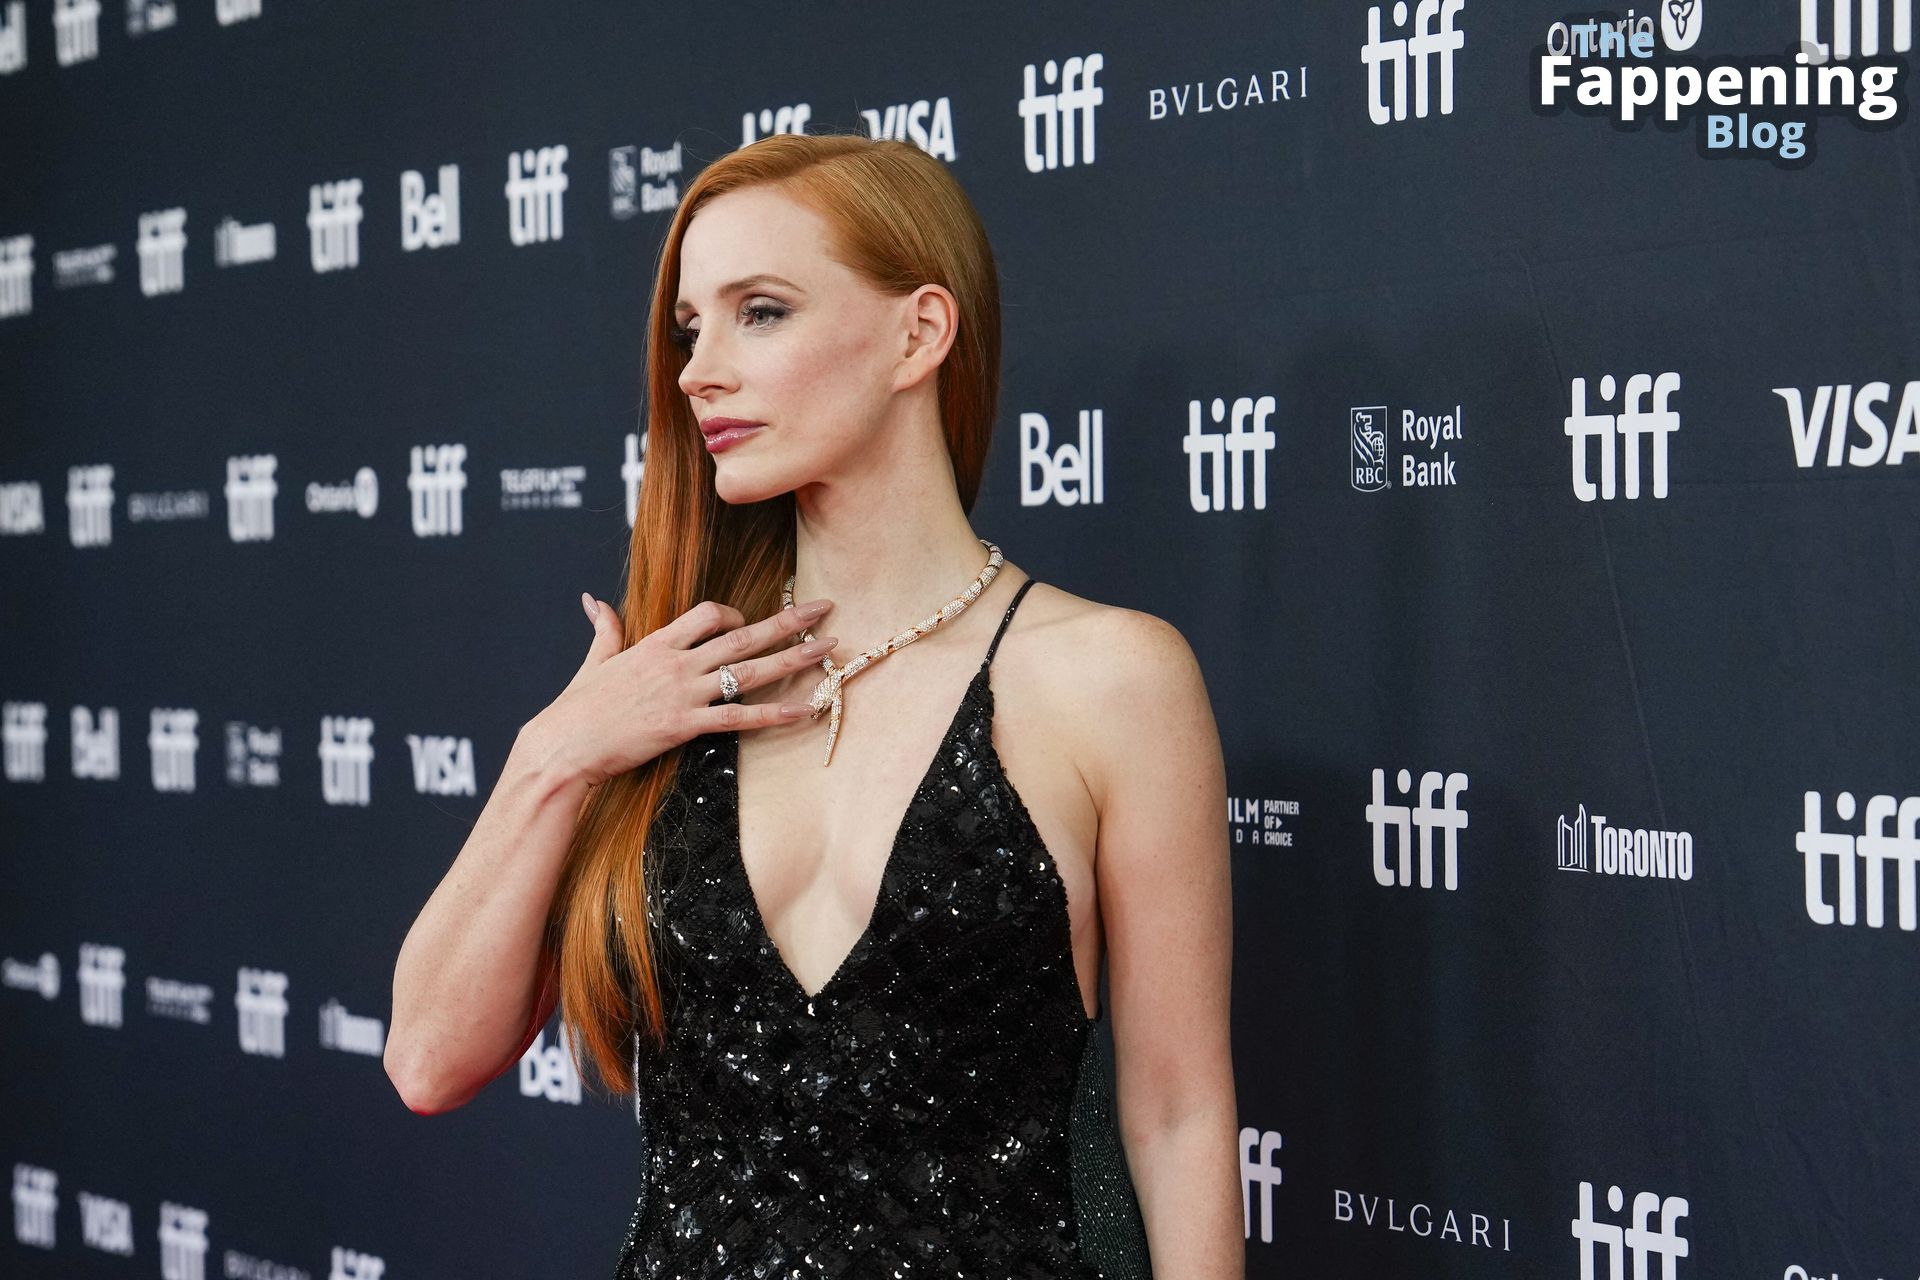 Jessica-Chastain-Sexy-5-The-Fappening-Blog.jpg